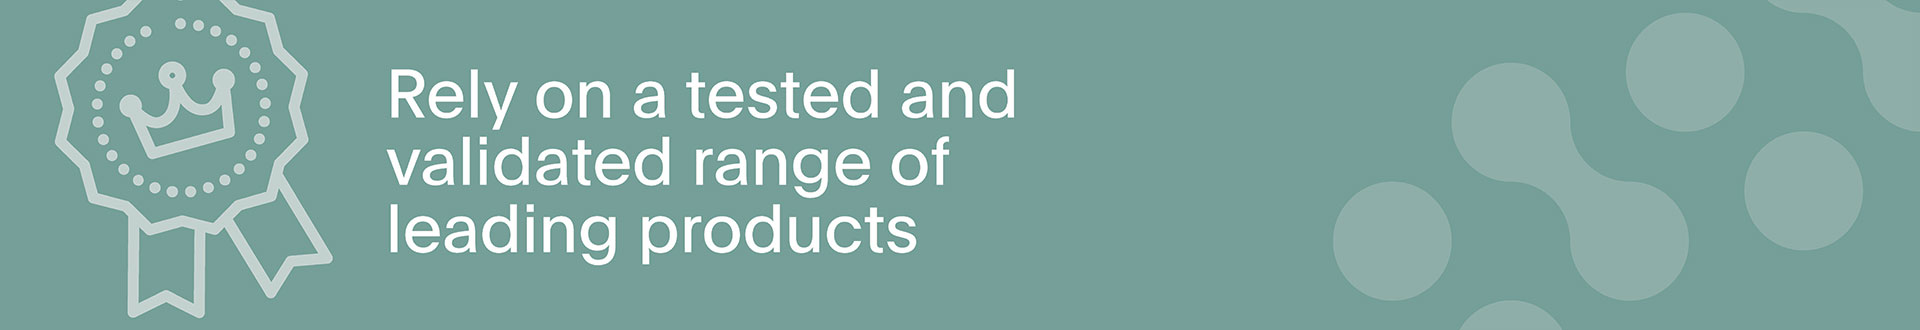 Rely on a tested and validated range of leading products